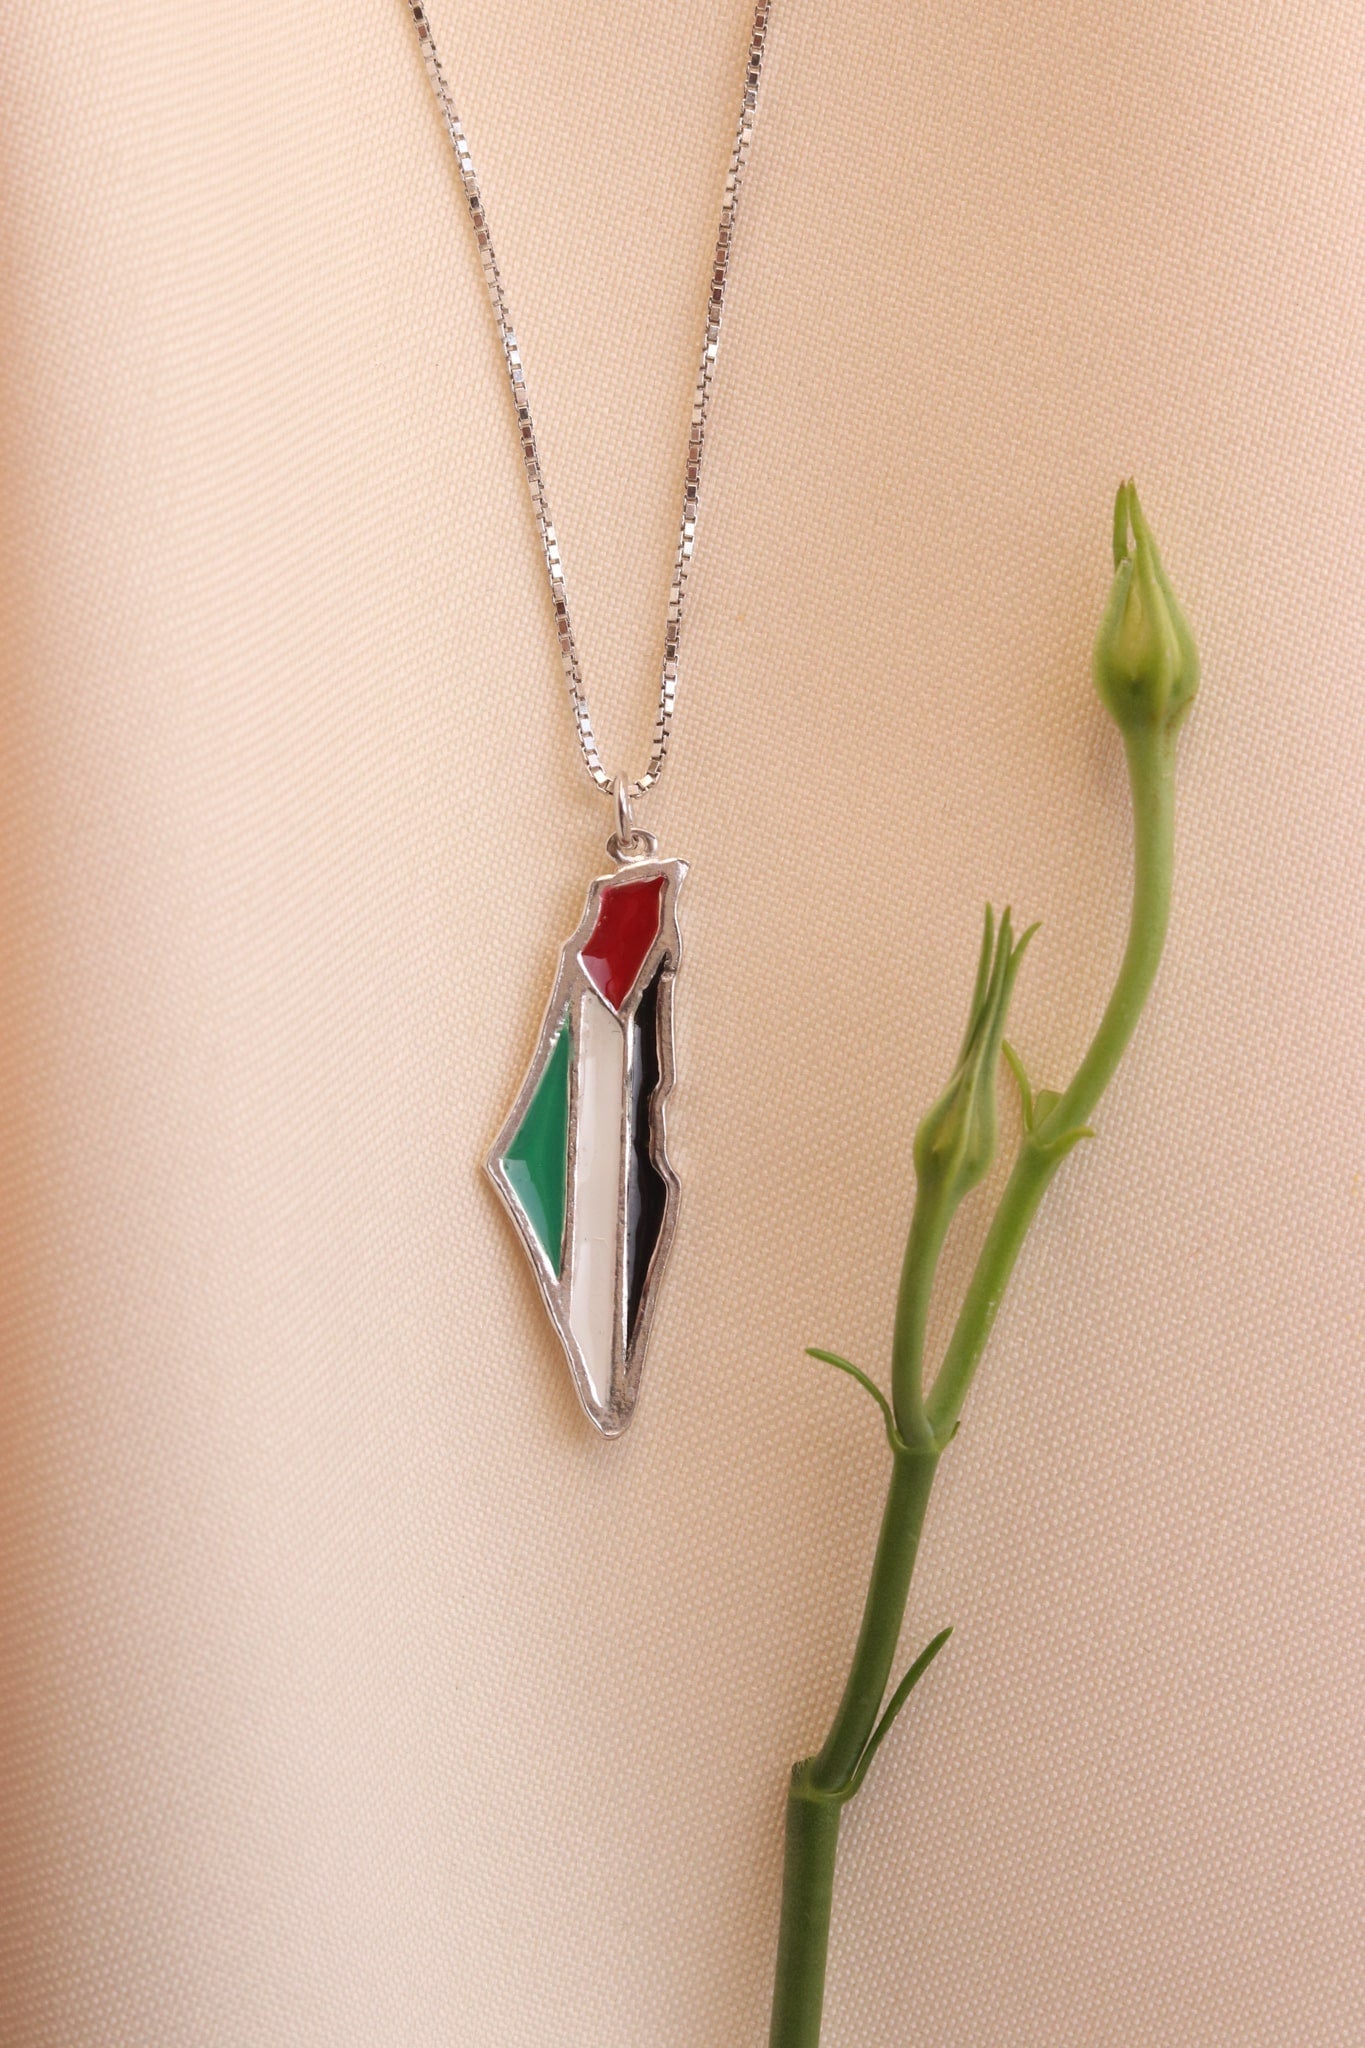 Palestine map with flag necklace